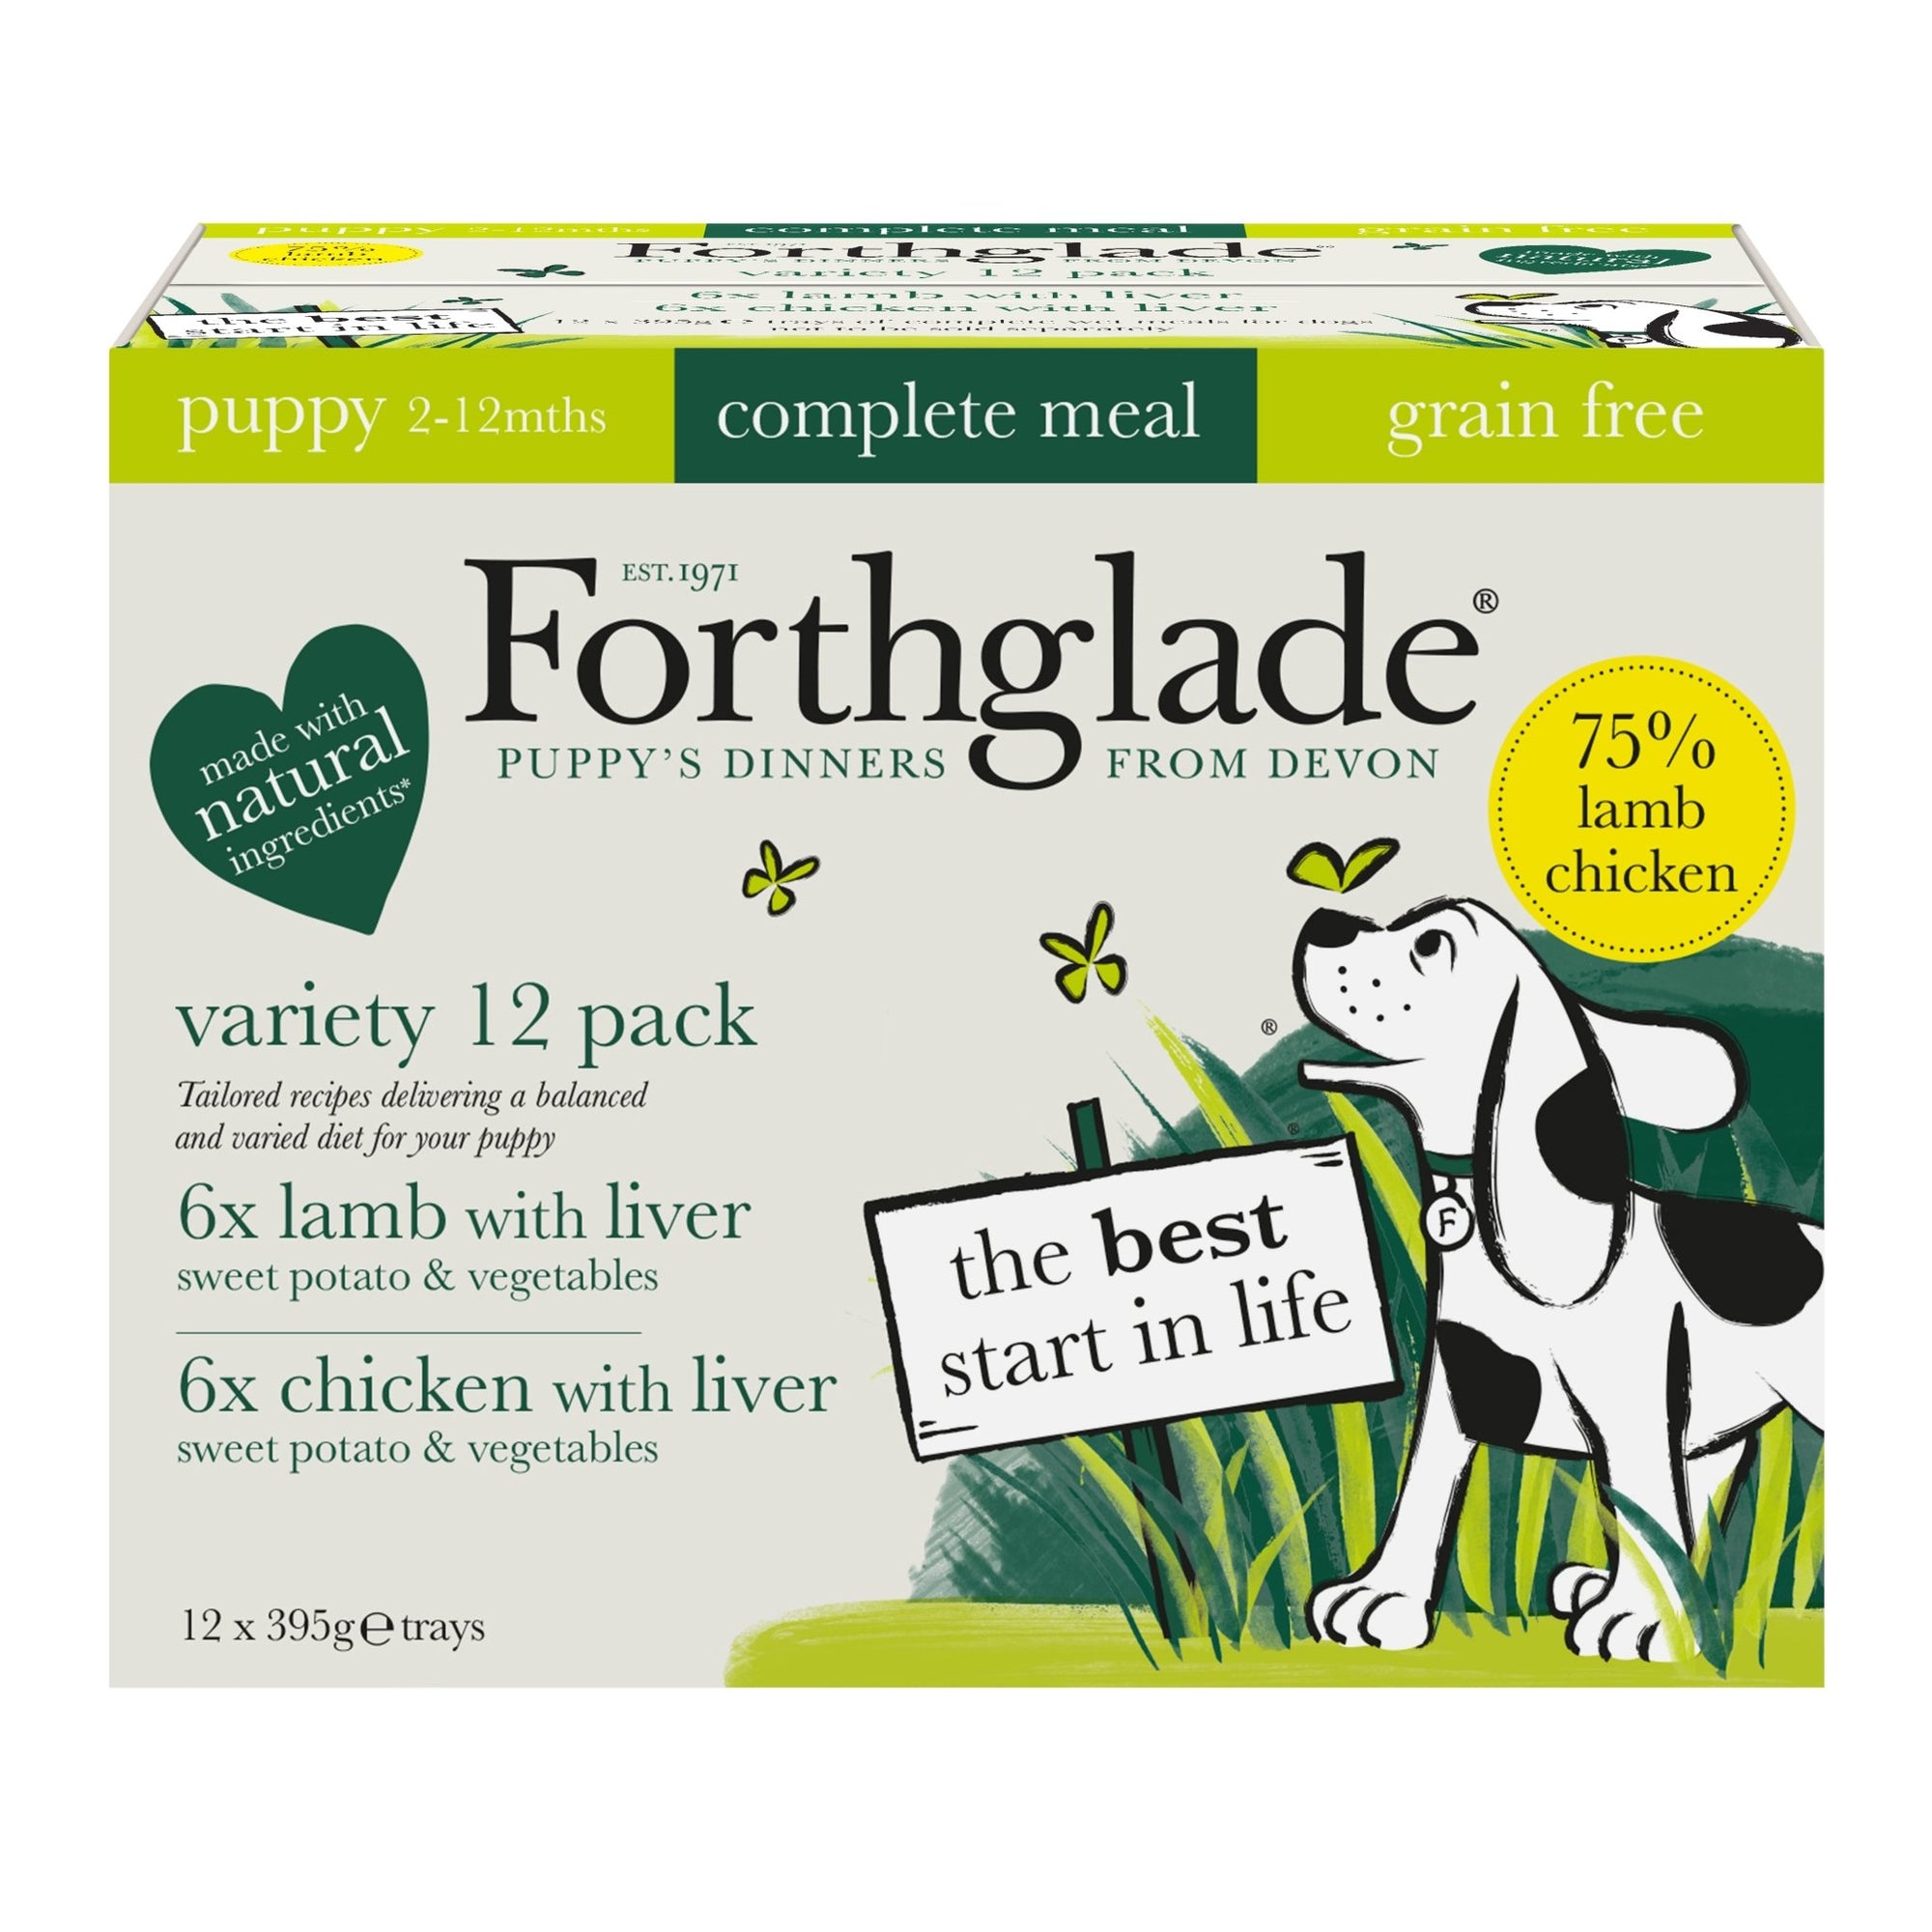 Forthglade Puppy Complete Grain Free Mixed 12x395g, Forthglade,